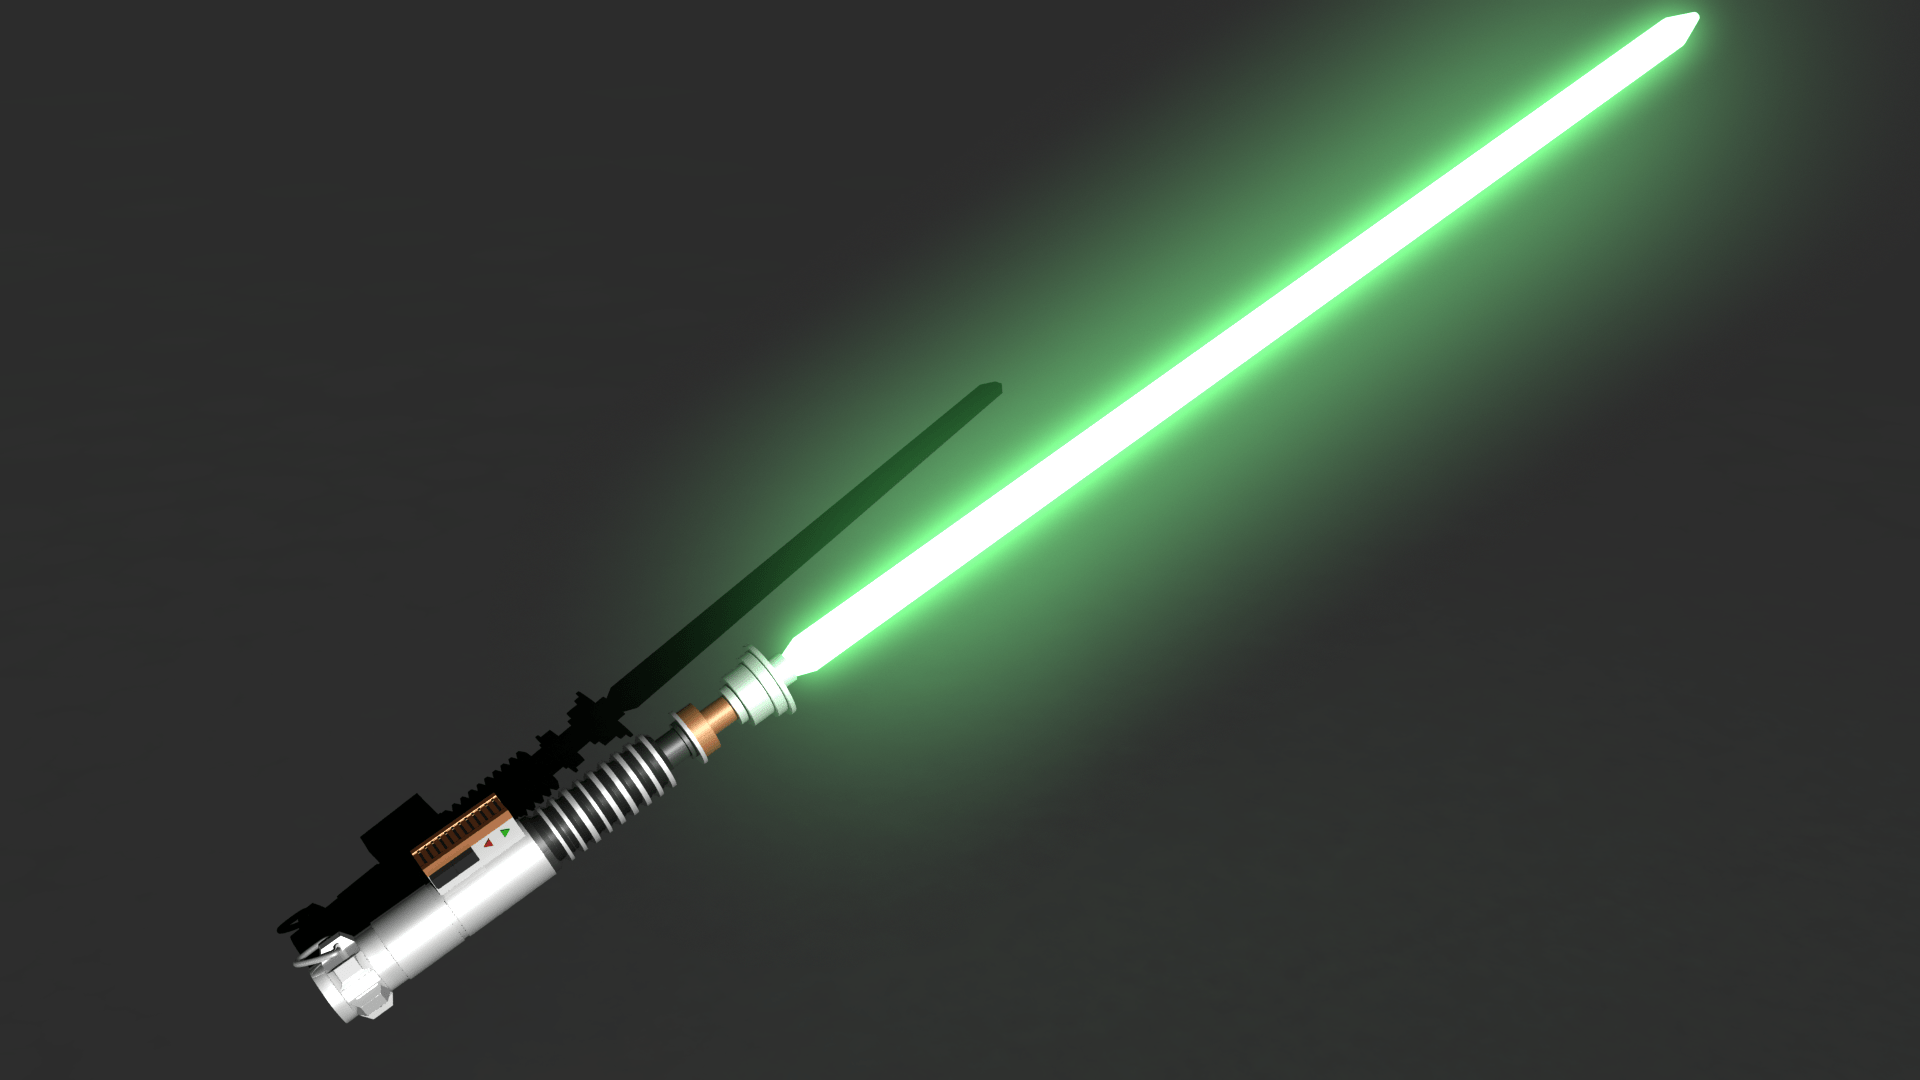 3000329 1280x1024 Green Lightsaber Jedi Lightsaber Pointed Ears Star  Wars Star Wars Episode III Revenge Of The Sith Yoda  Rare Gallery HD  Wallpapers